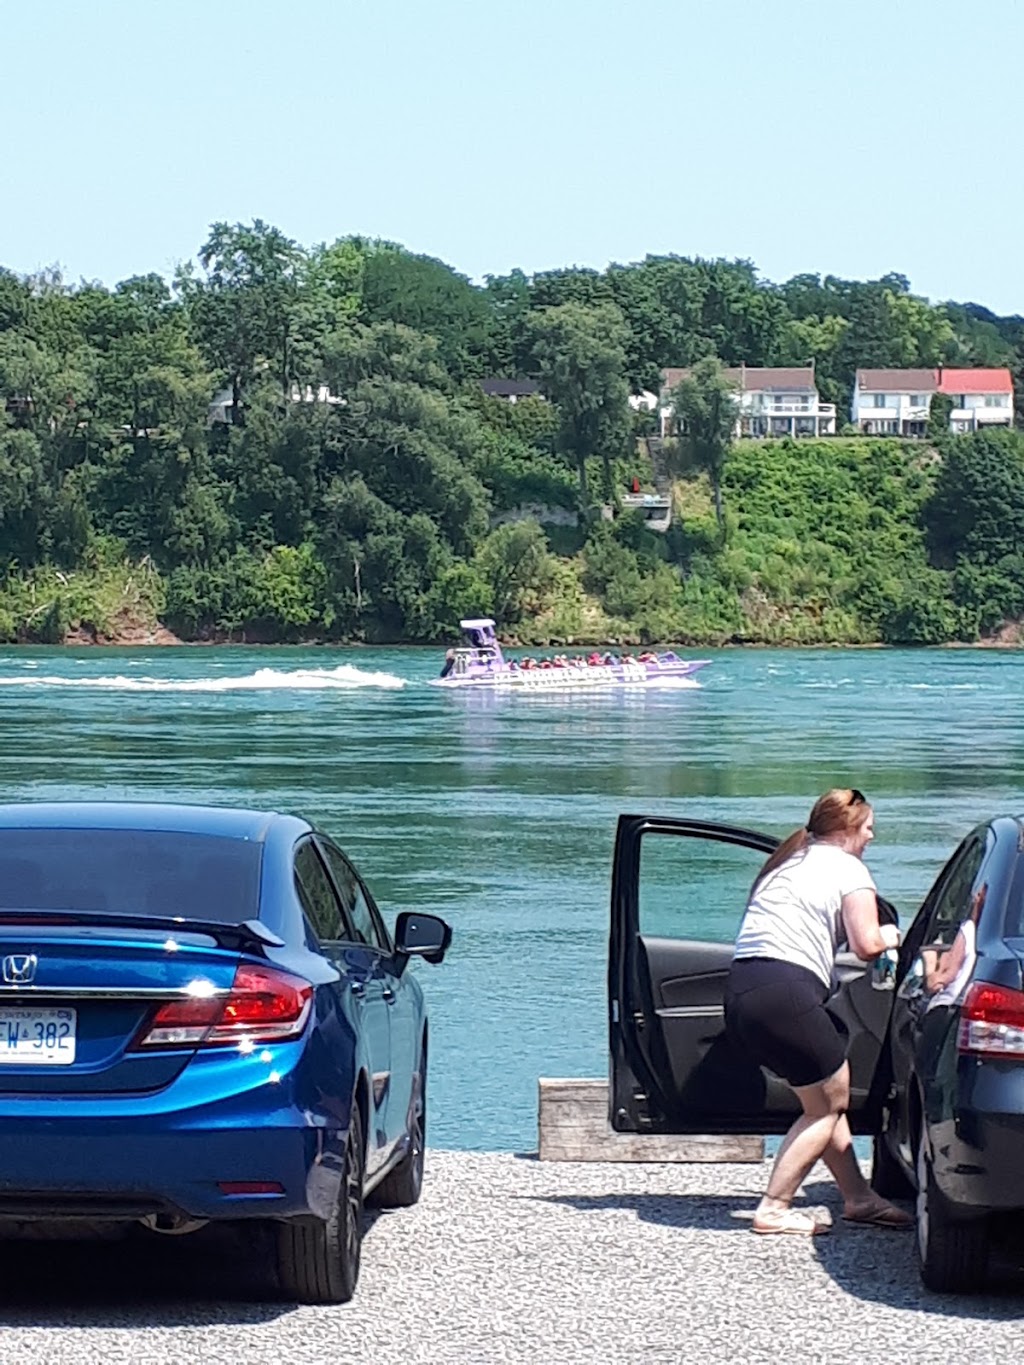 Whirlpool Jet Boat Tours | 55 River Frontage Road, Queenston, ON L0S 1L0, Canada | Phone: (888) 438-4444